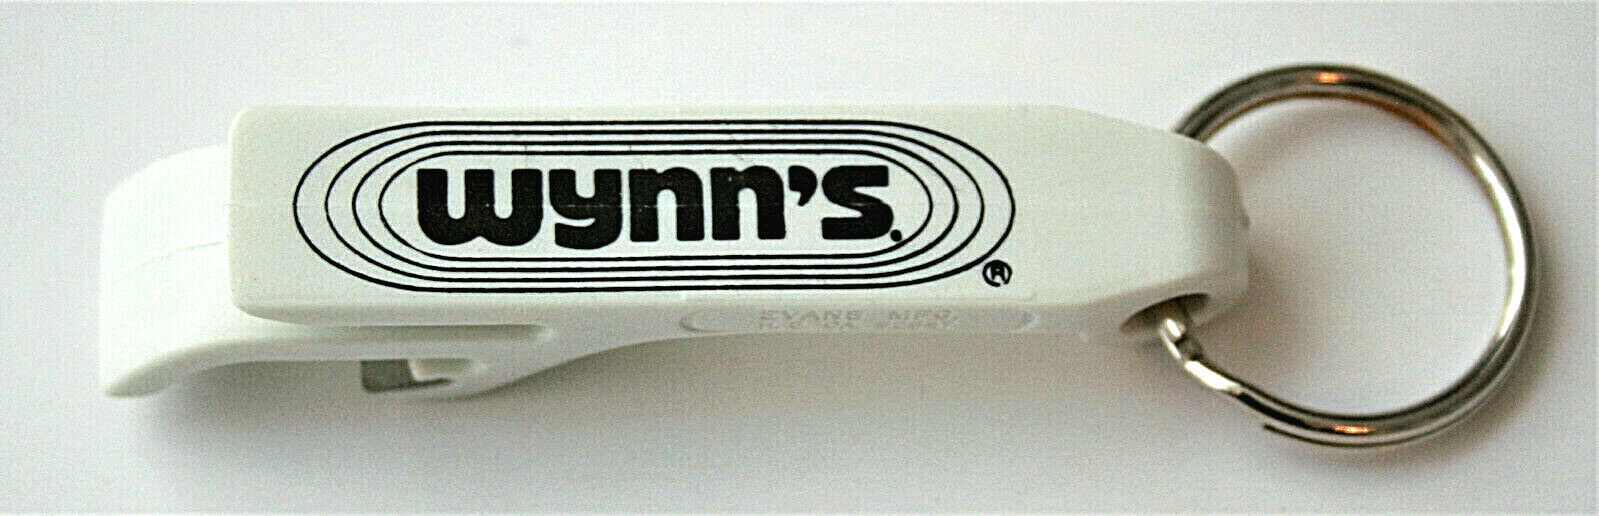 Wynn's Friction Proofing Oil Treatment Bottle Opener Key Chain 1980s NOS New 